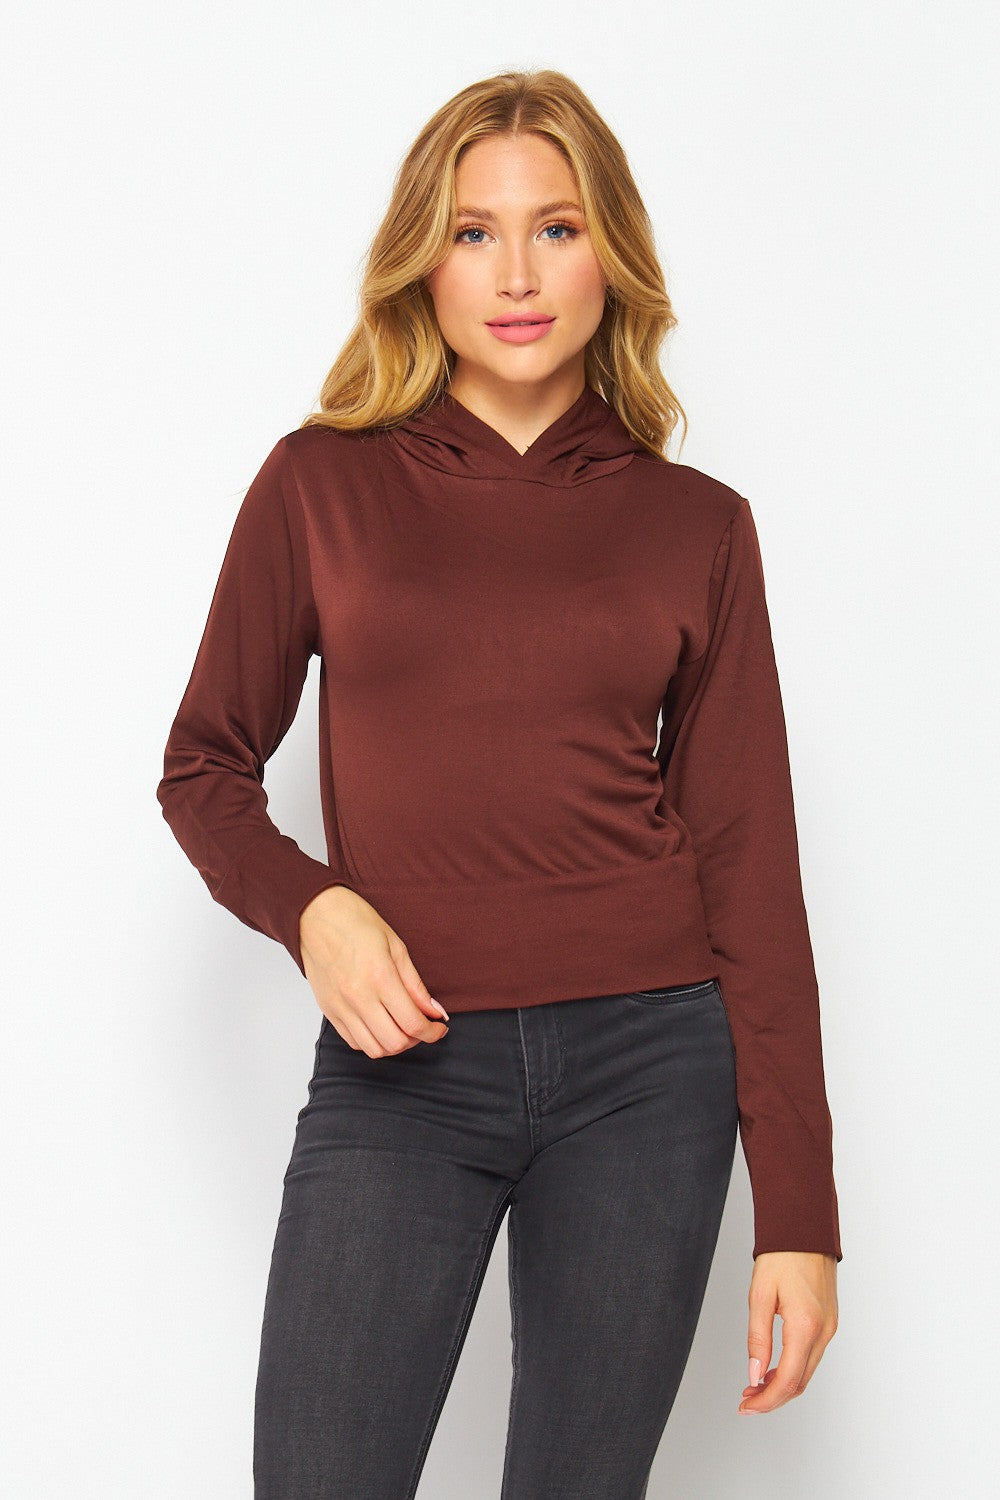 Jr Top - Long Sleeve With Hood - Brown-hotRAGS.com